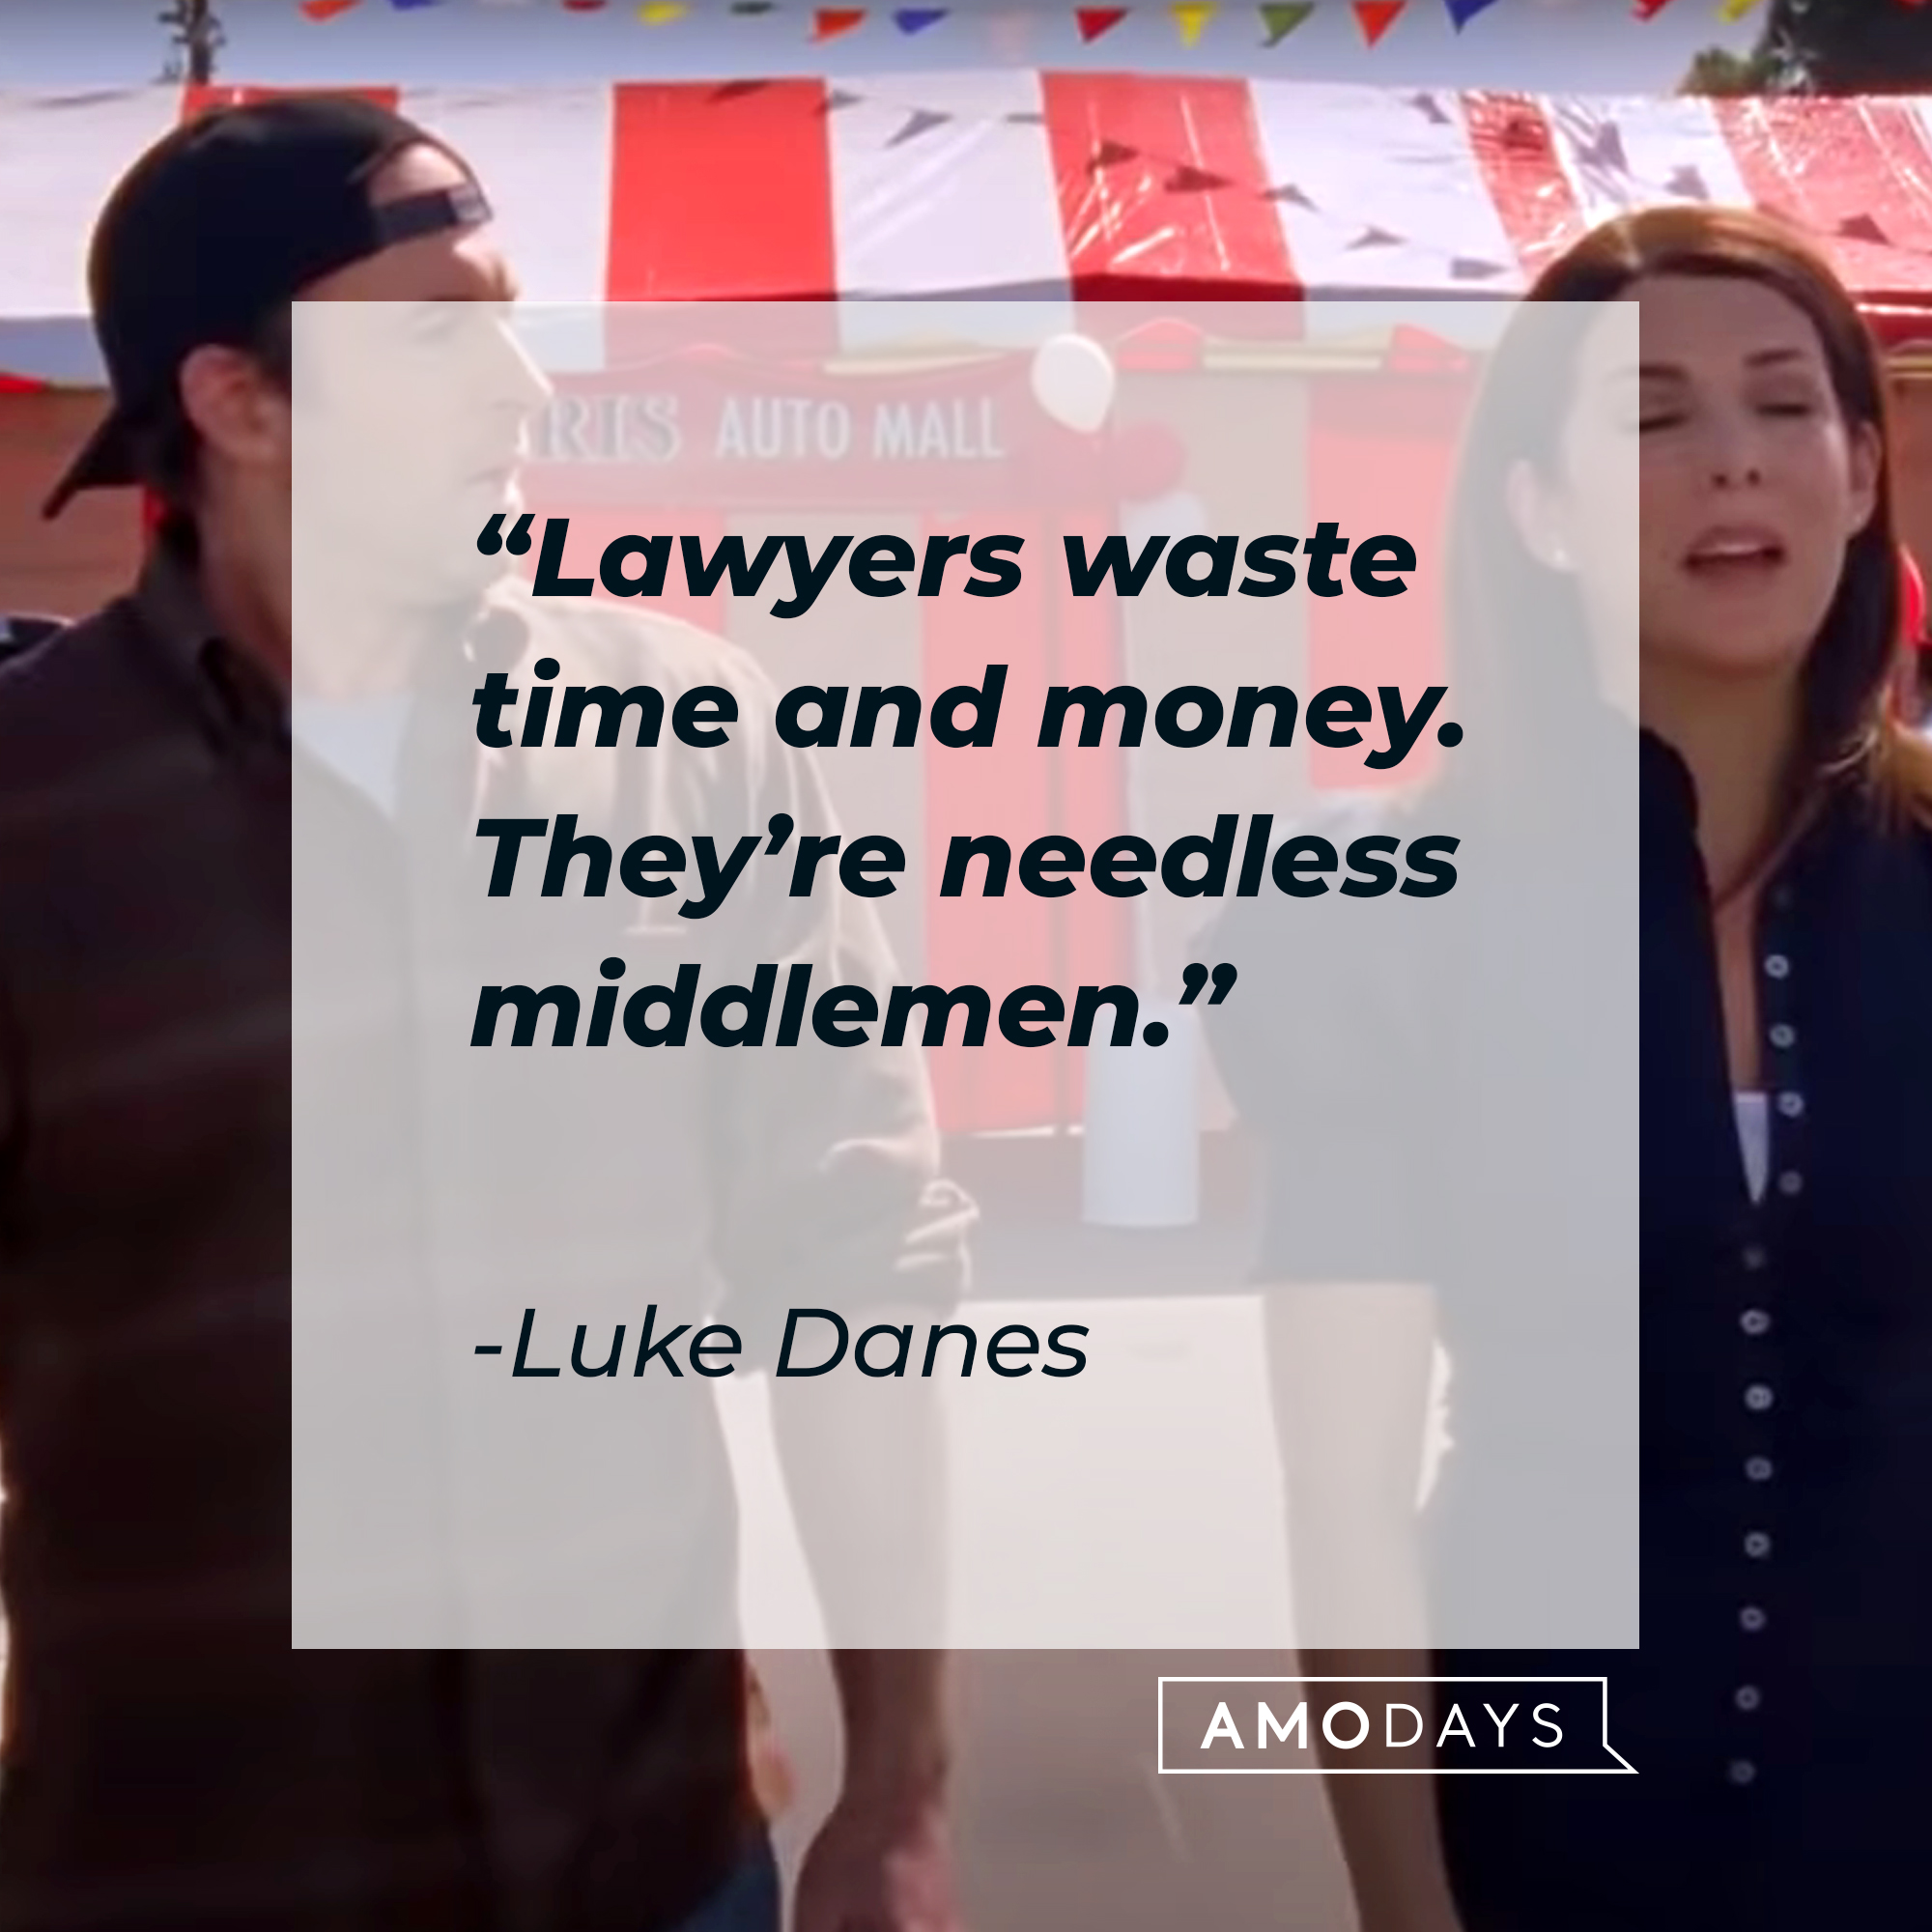 Luke Danes, with his quote: “Lawyers waste time and money. They’re needless middlemen.” | Source: facebook.com/GilmoreGirls